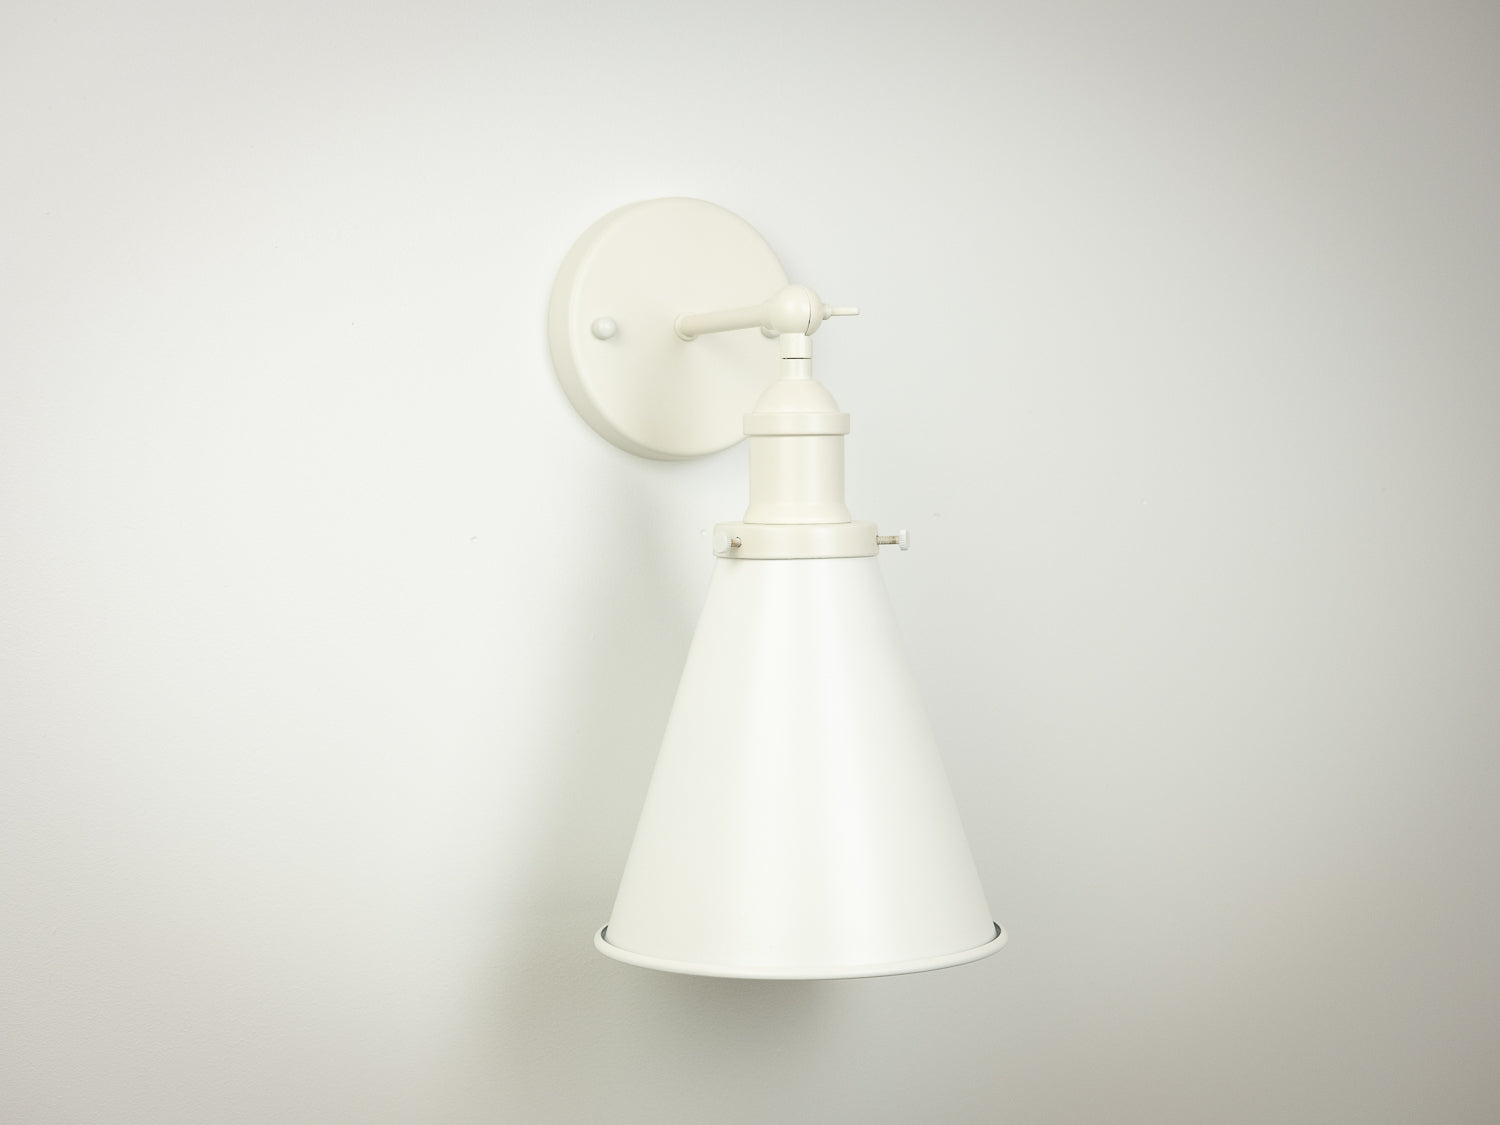 Vintage Wall Light with White Metal Funnel Shade